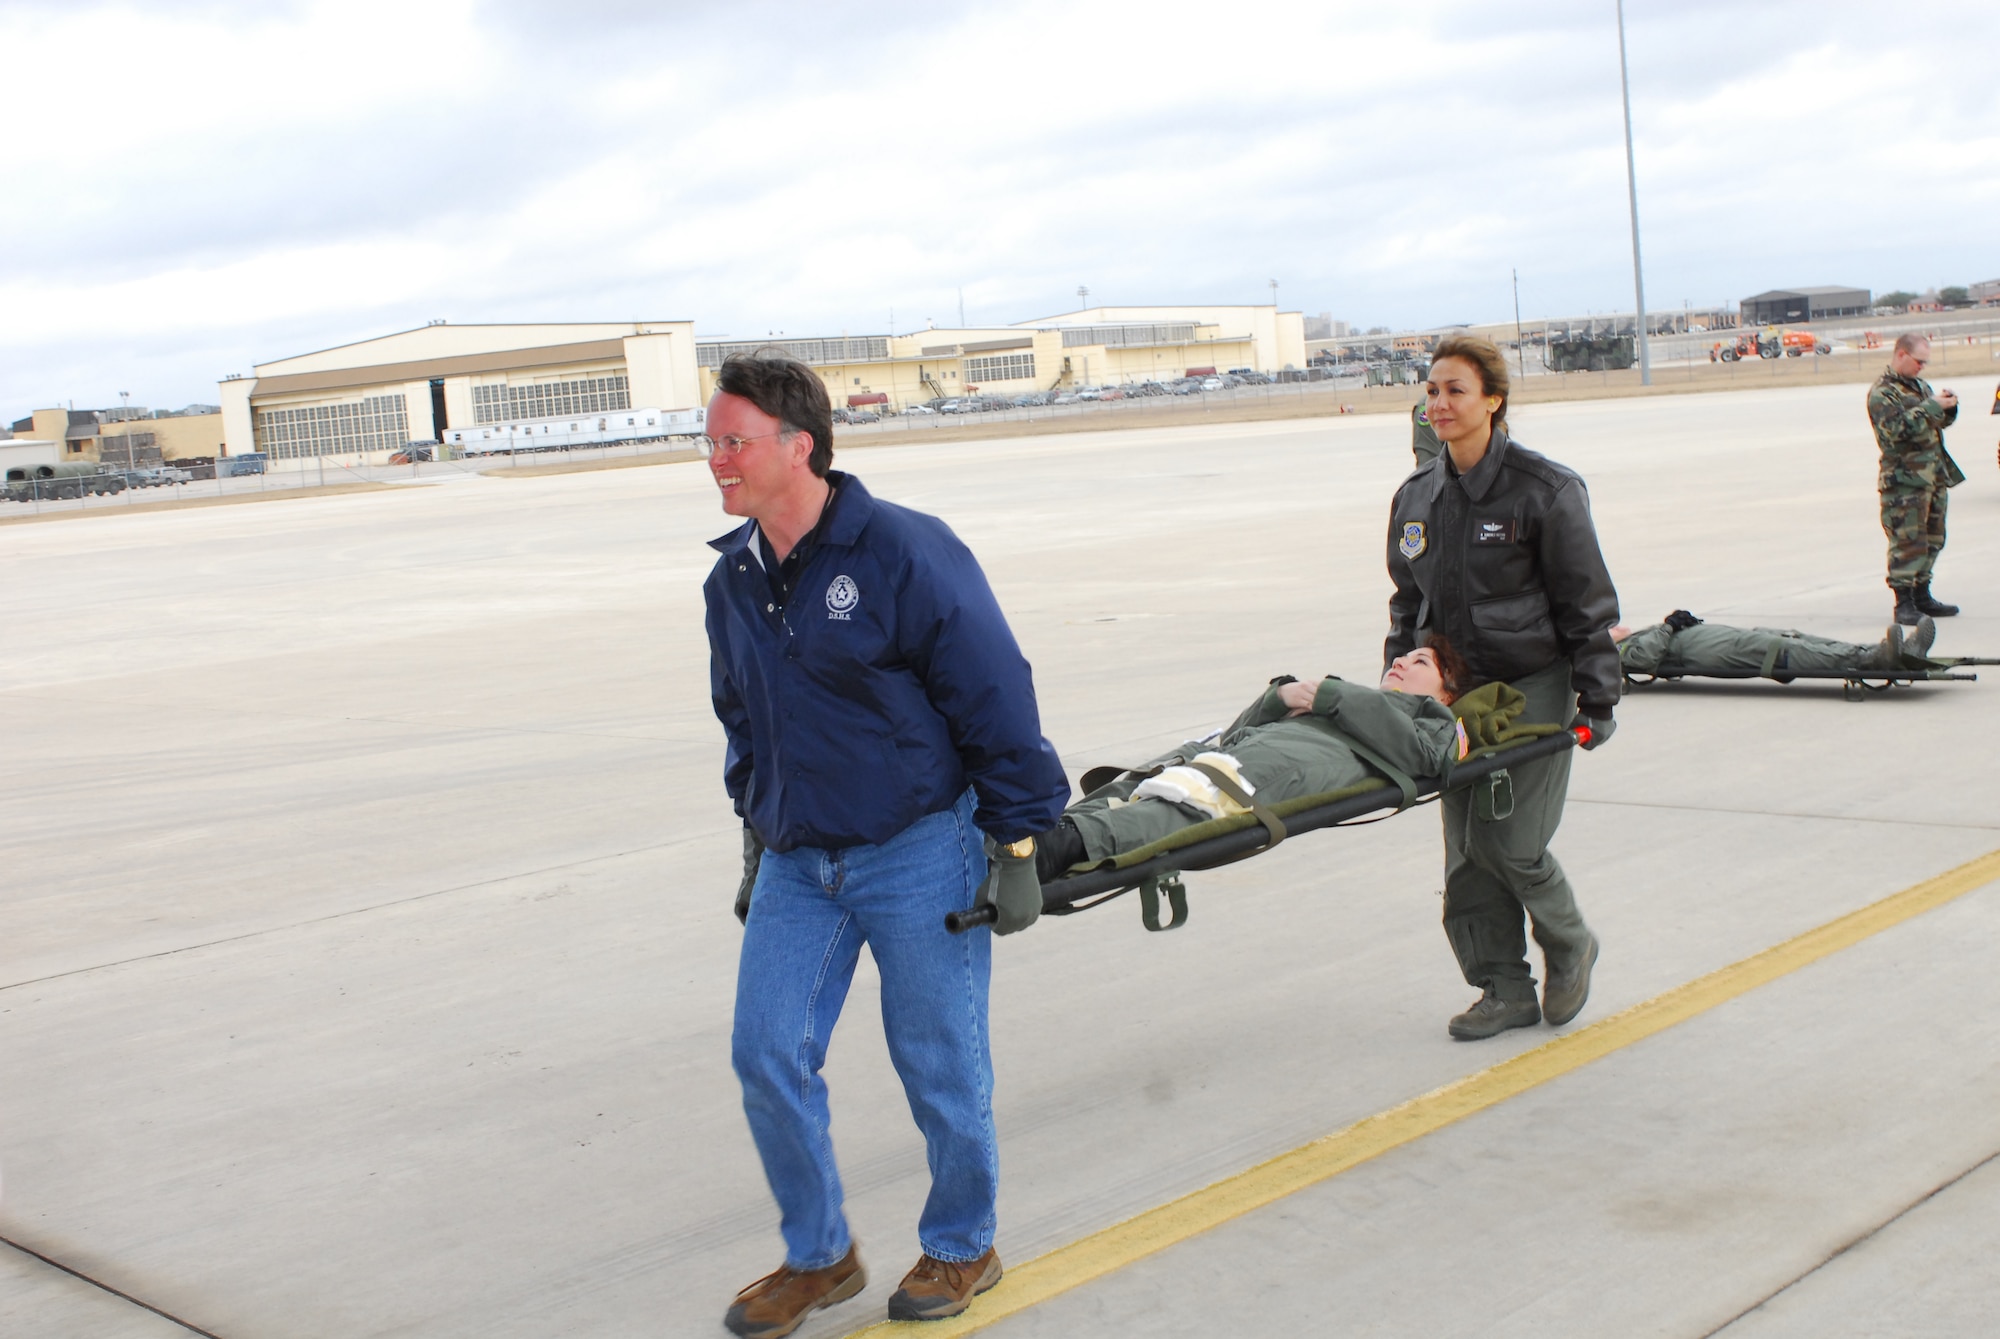 Dr. David Lakey, commissioner of the Department of State Health Services (DSHS), helps an Airman carry a litter “patient” into the back of a C-17 aircraft during a training exercise. He and three other key staff members from the DSHS visited Lackland Air Force Base, Texas, Feb. 7 to learn about the aircraft and its medical evacuation capabilities. (TXMF photo by Tech. Sgt. Rene 